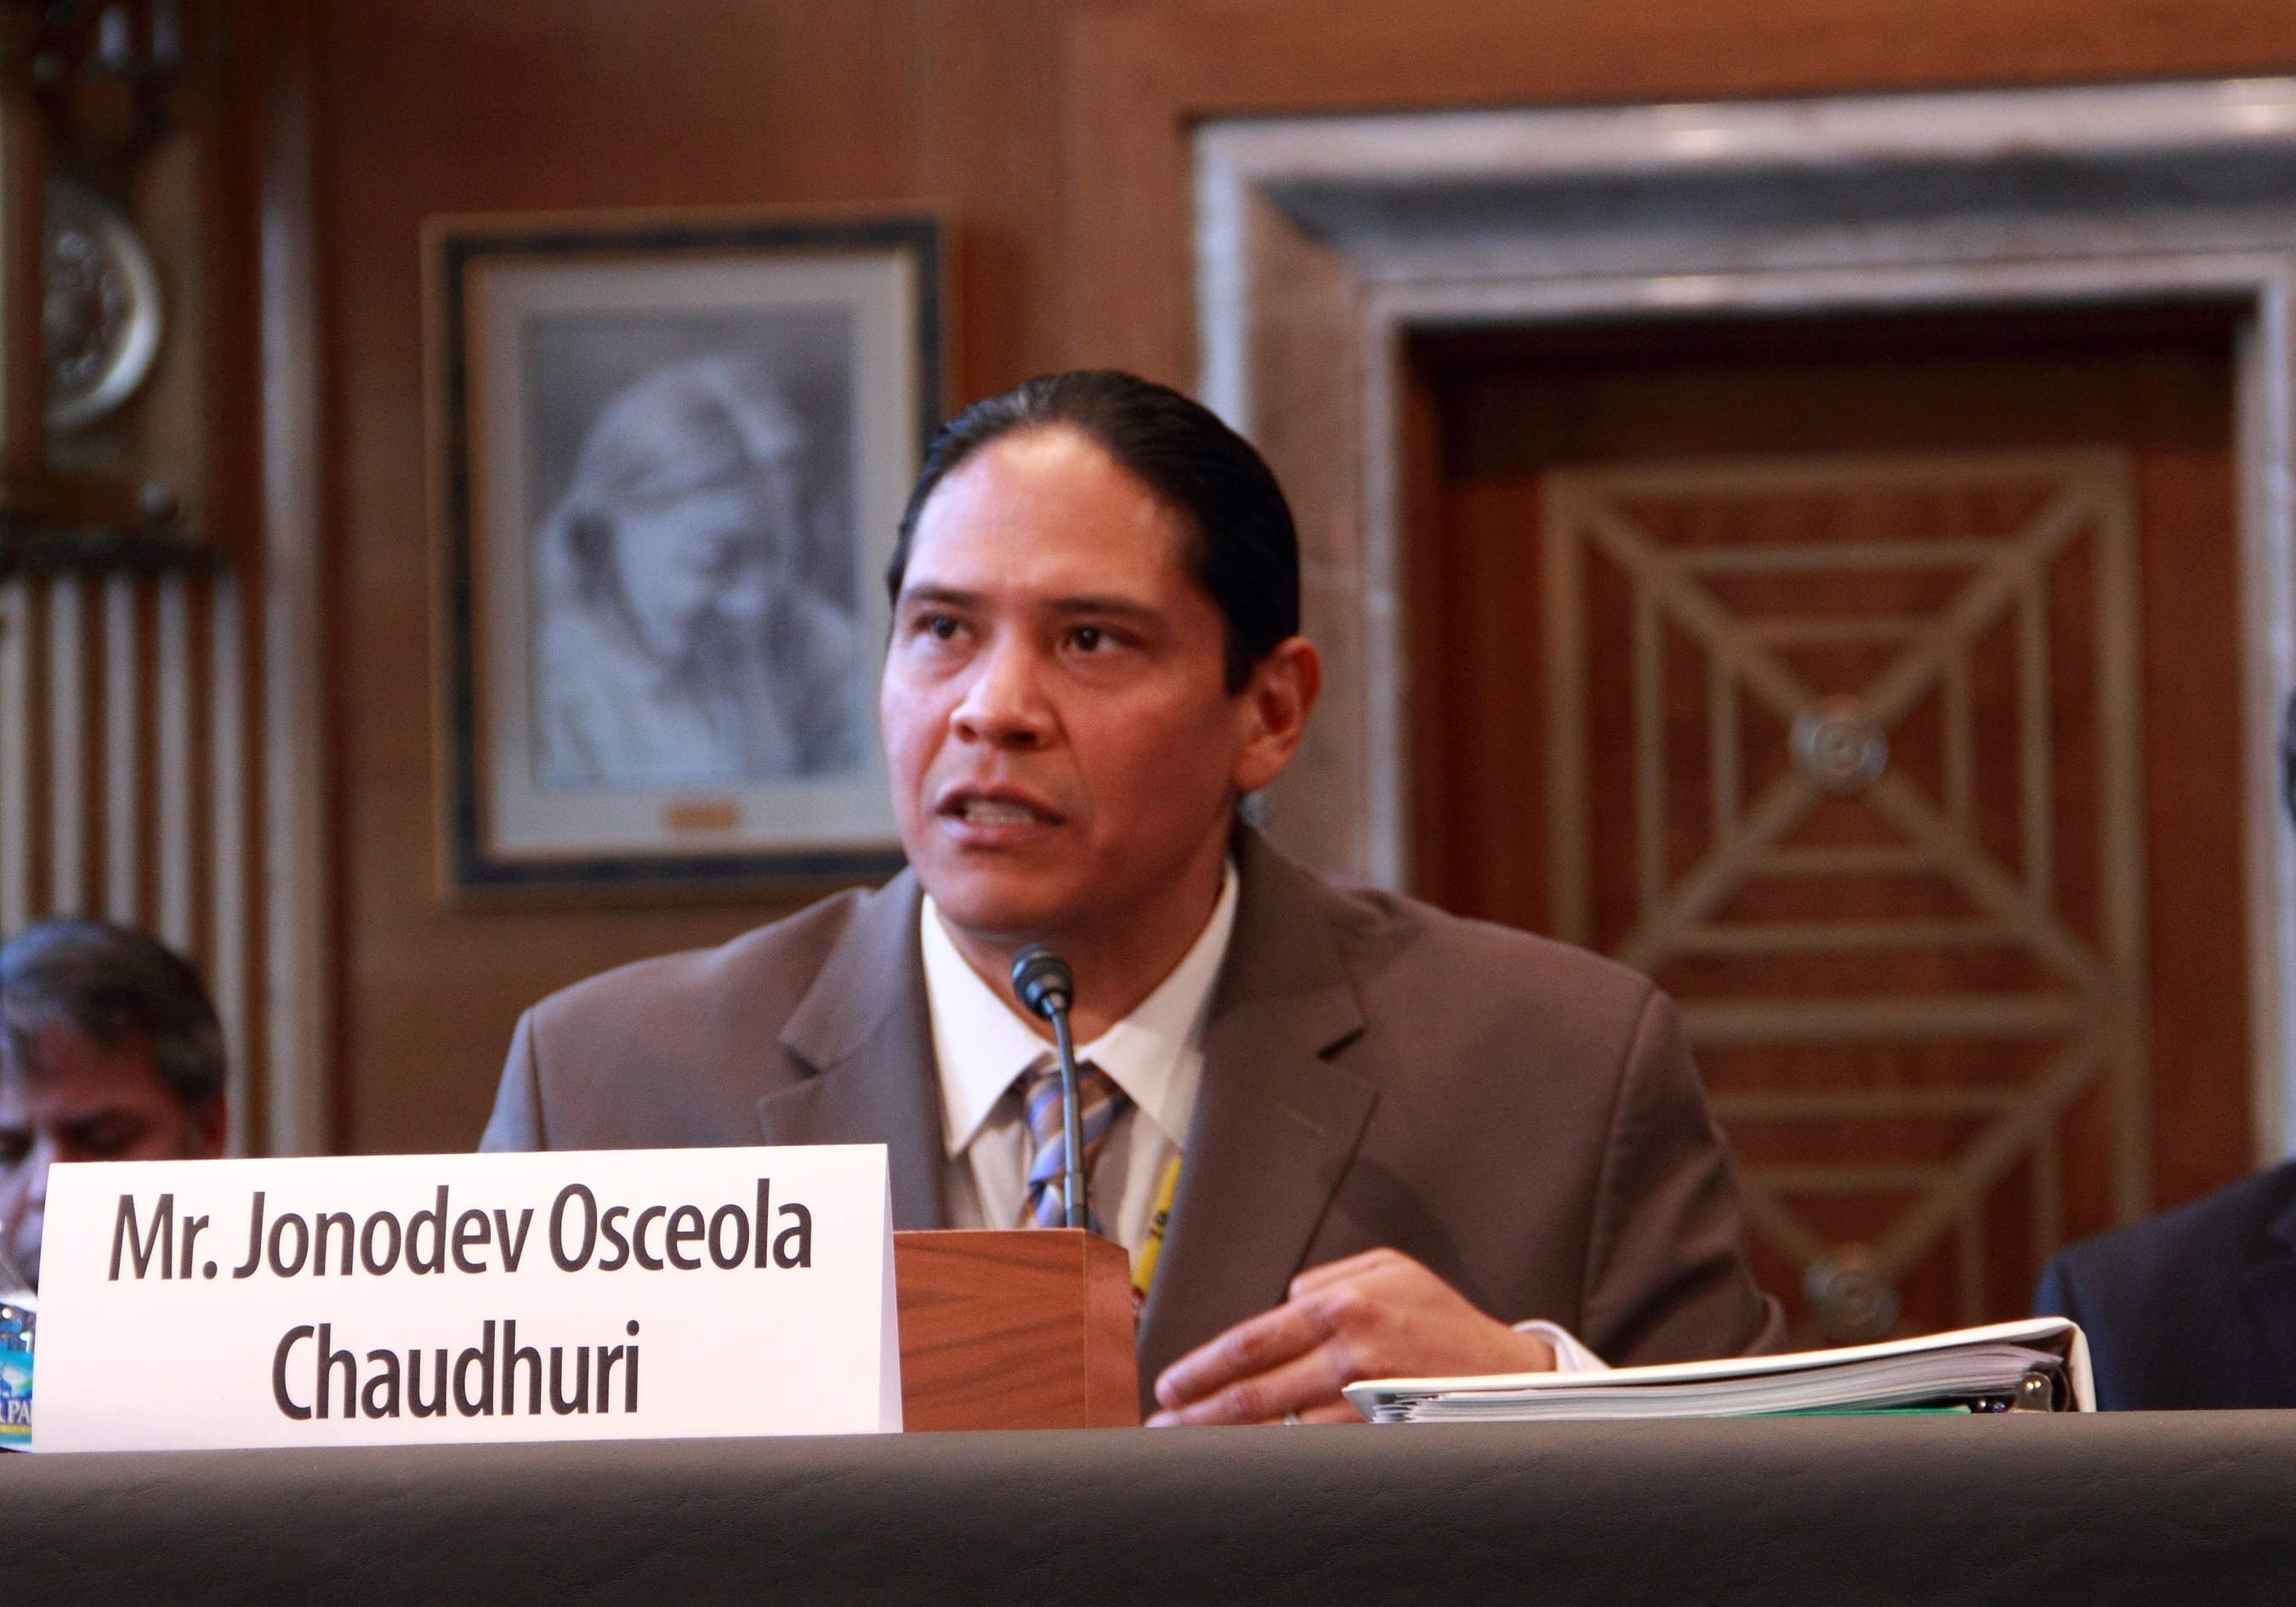 Jonodev Chaudhuri, President Obama's nominee for Chairman of the National Indian Gaming Commission, testifies before the U.S. Senate on Indian Affairs Committee at his nomination hearing March 11, 2015.  Chaudhuri was confirmed by the Senate April 16, 2015 as the ninth presidentially appointed and Senate-Confirmed Chair for the Indian gaming regulatory agency.